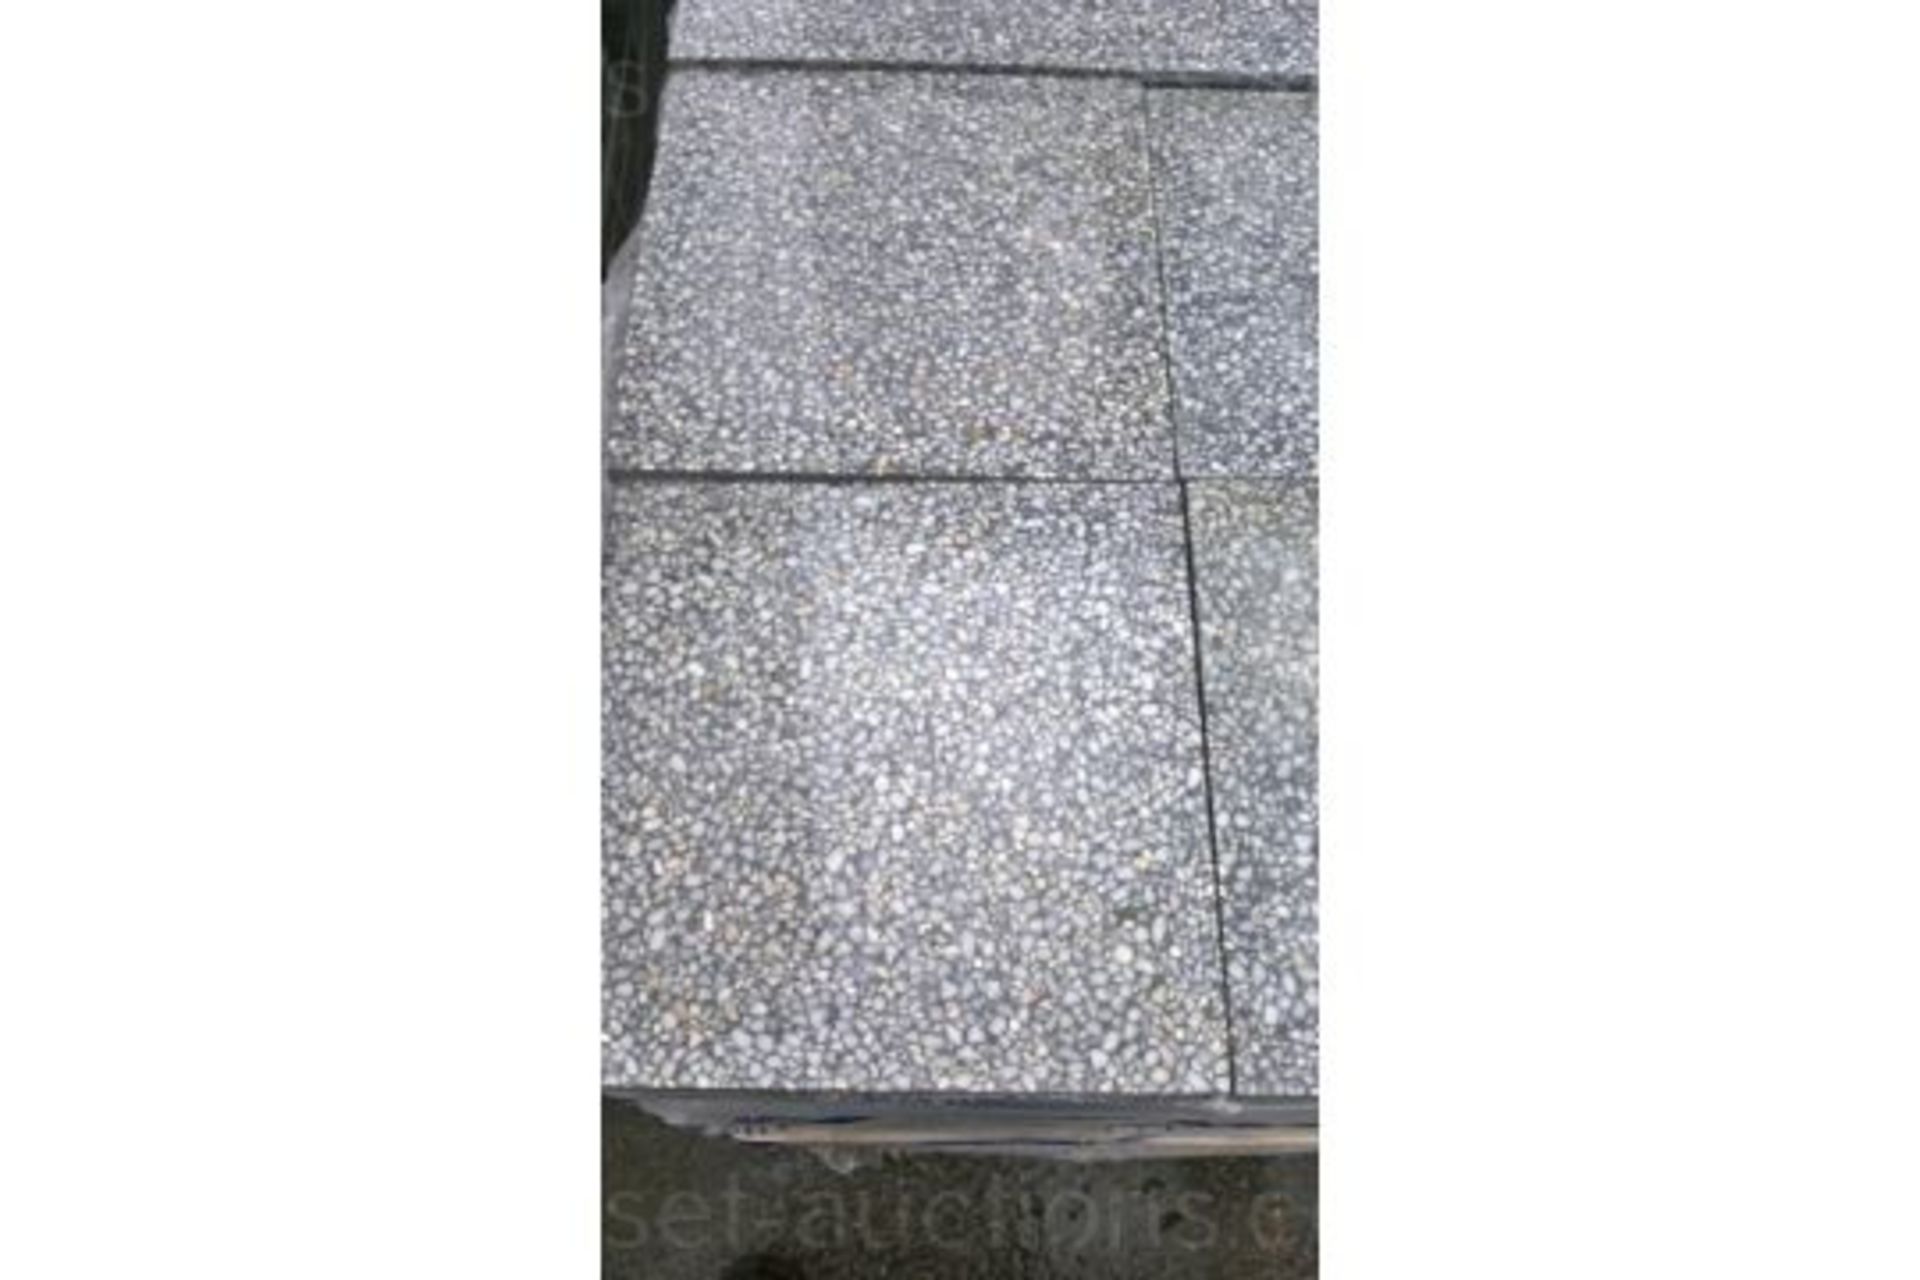 1 PALLET OF BRAND NEW GREY TERRAZZO COMMERCIAL TILES Z30099, COVERS 24 SQUARE YARDS *PLUS VAT* - Image 2 of 6